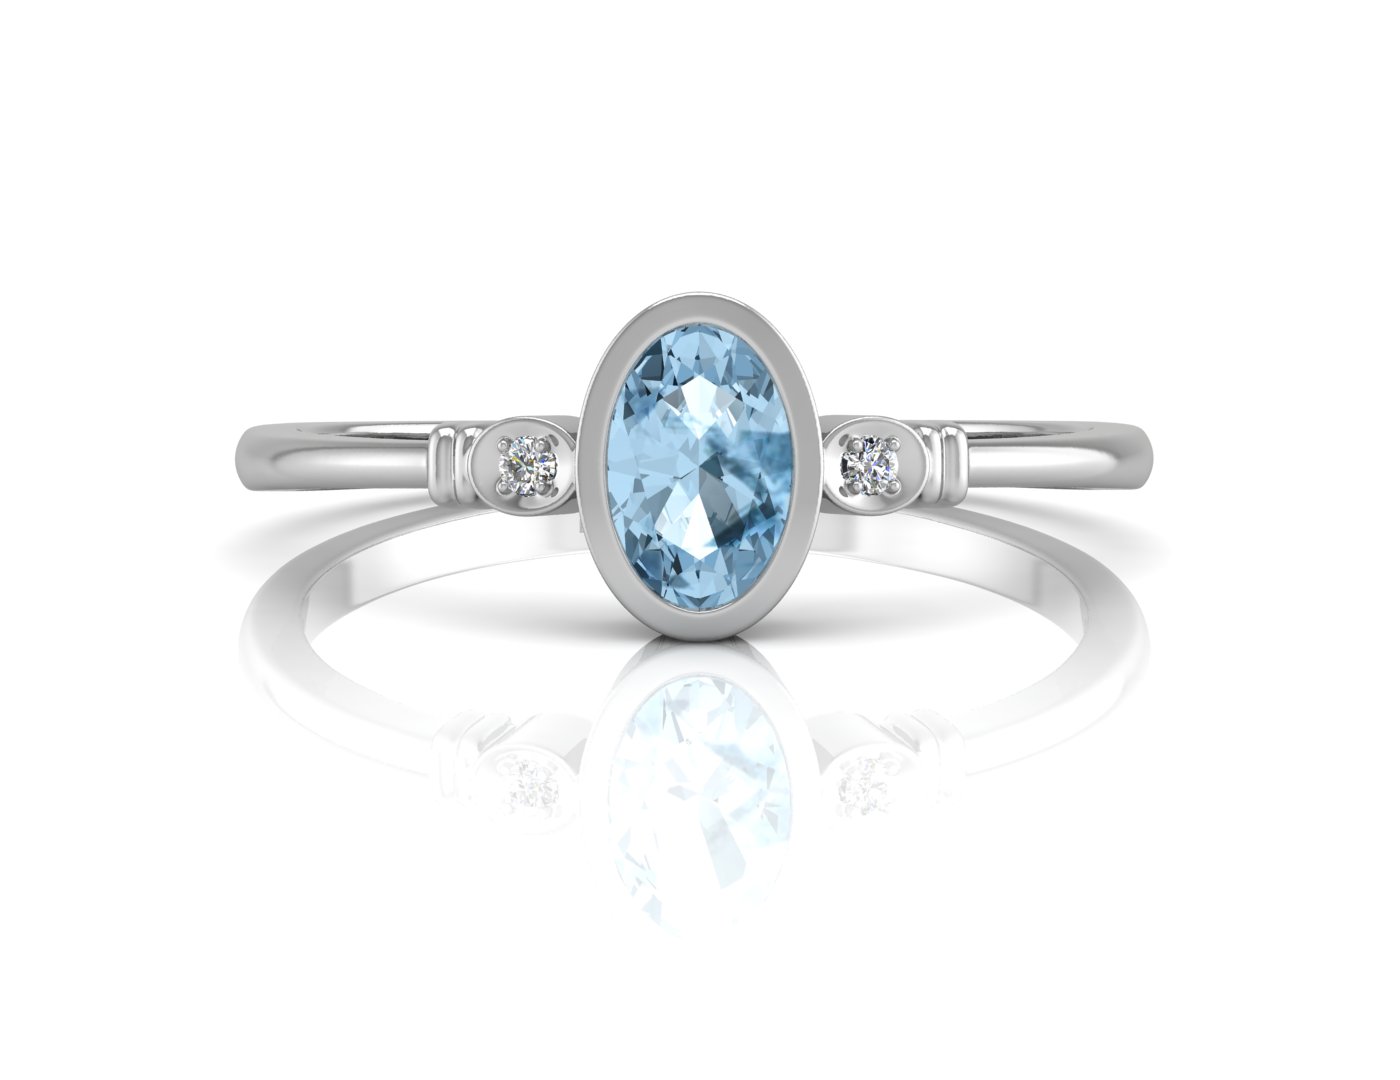 9ct White Gold Diamond And Oval Shape Blue Topaz Ring - Image 4 of 5